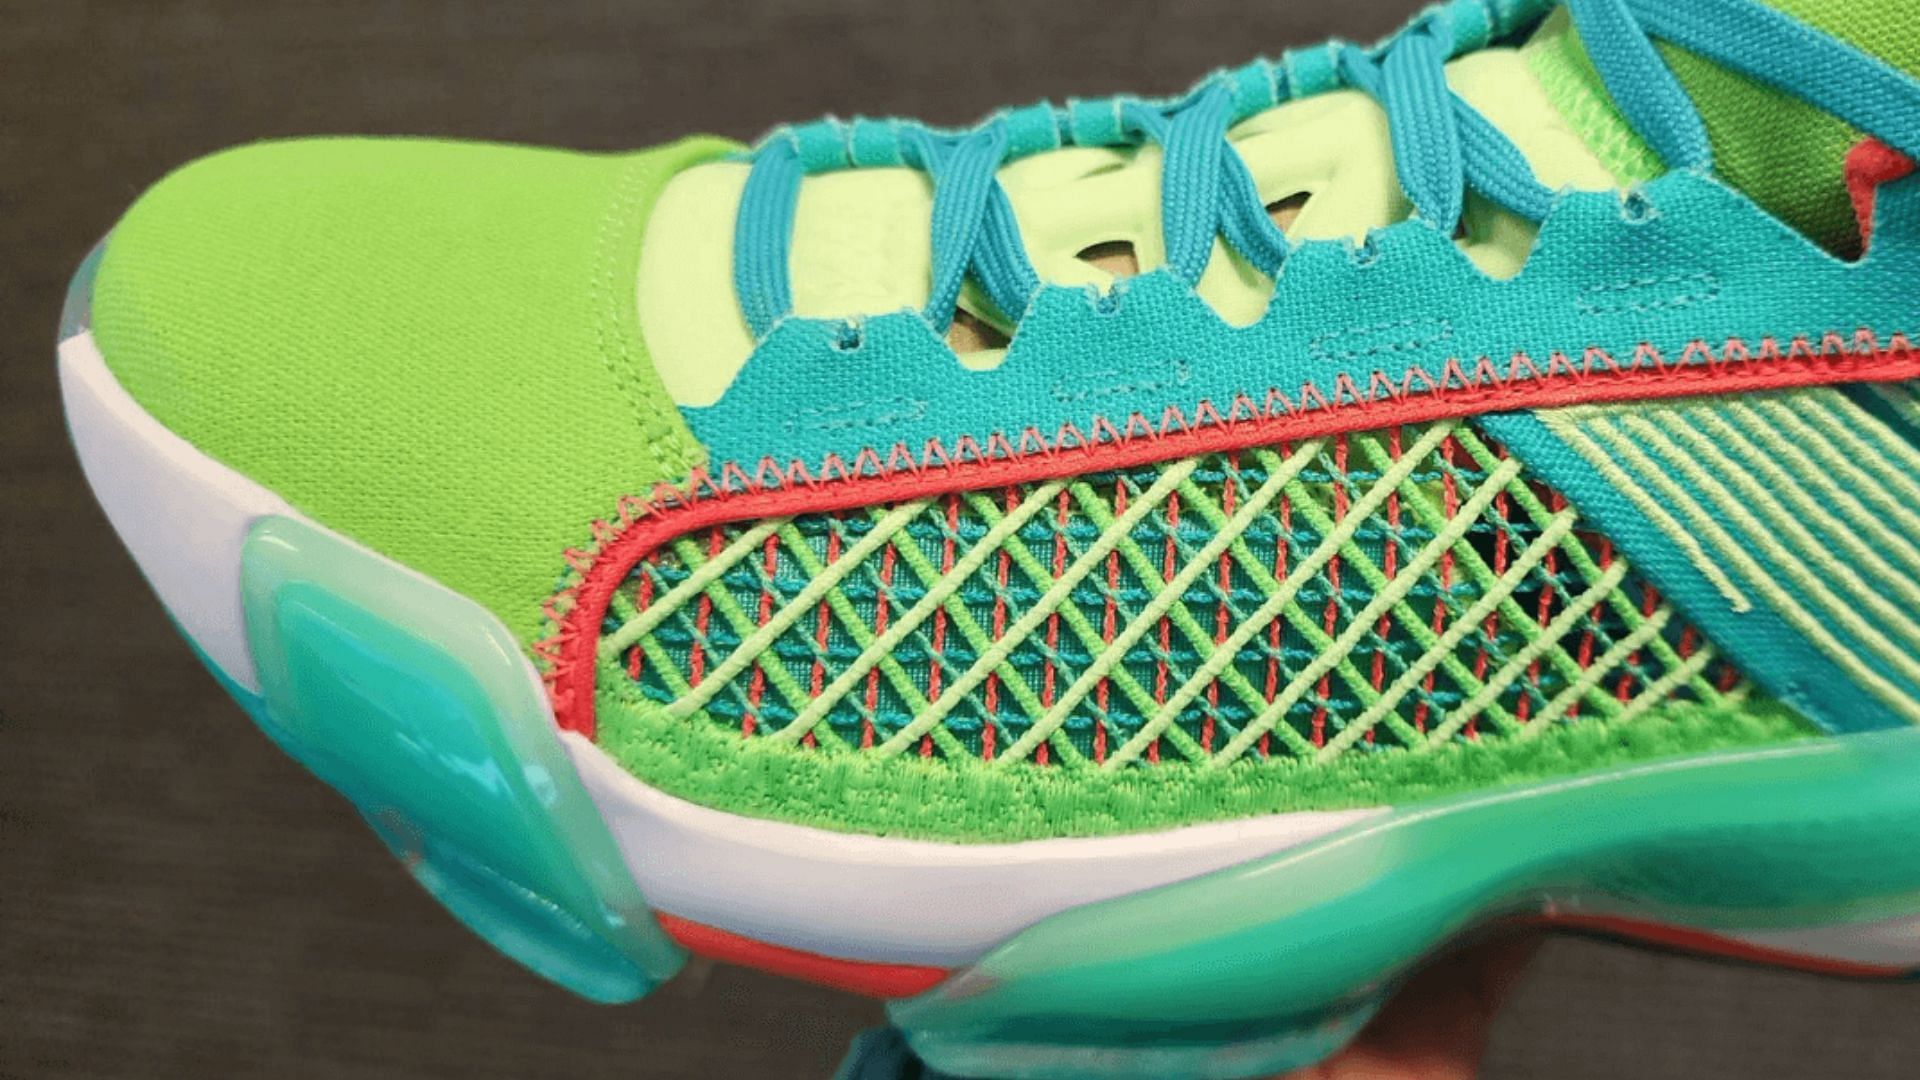 Here&#039;s another closer look at the shoe (Image via Instagram/@chinahamilton)